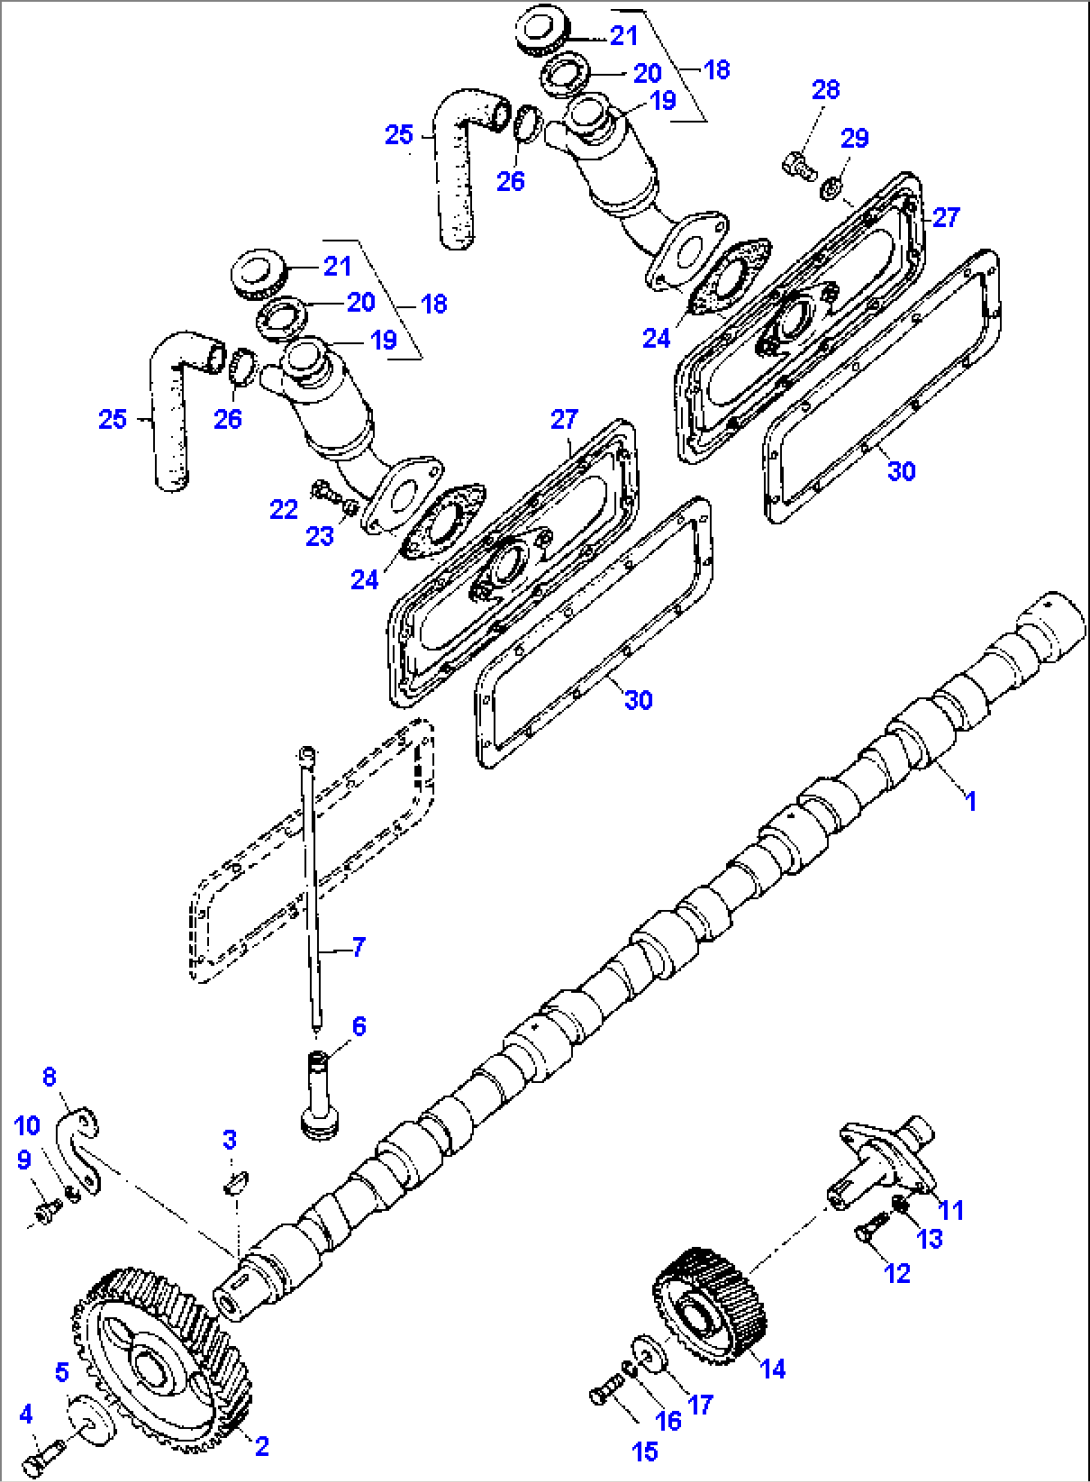 ENGINE TIMING GEAR